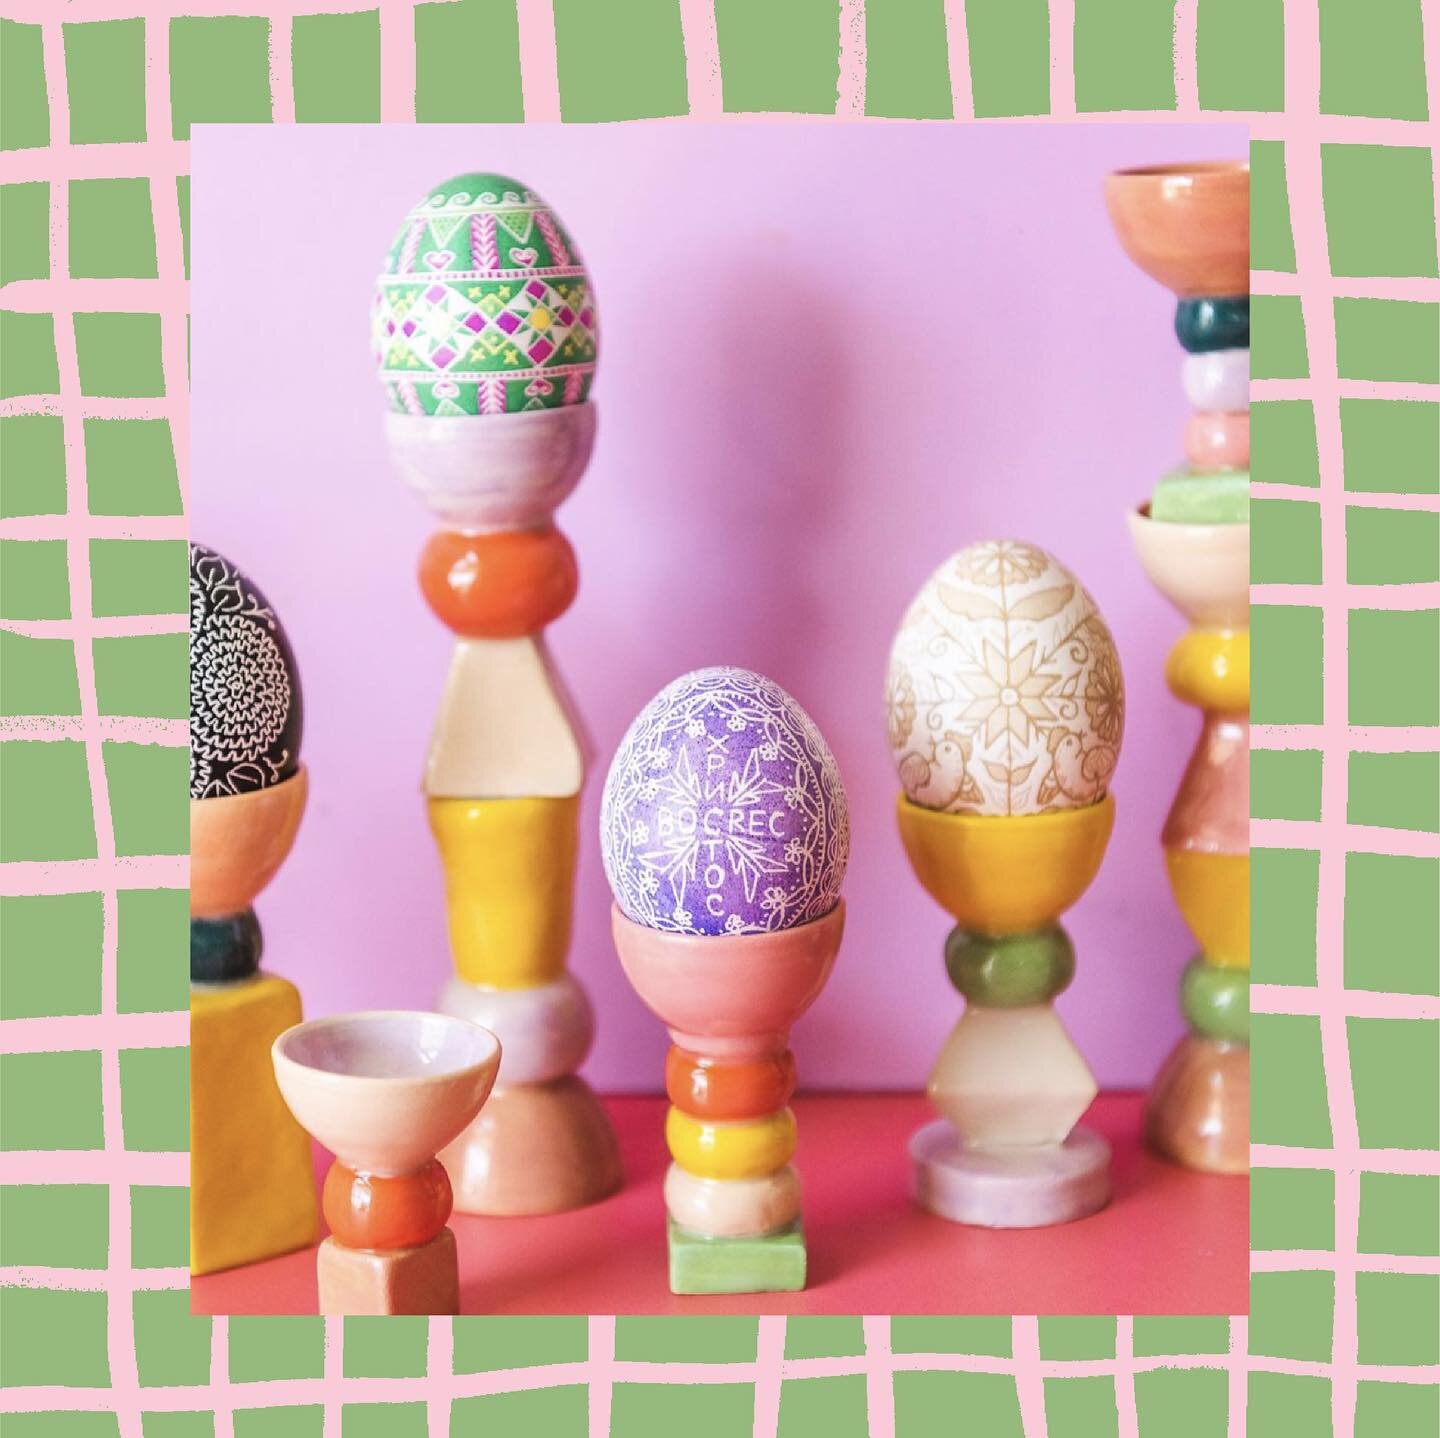 🐰Easter is hopping into view, and we&rsquo;re celebrating the art of egg decorating. We&rsquo;re particularly inspired by Pysanky eggs, a truly beautiful Ukrainian tradition. Here are two book recommendations if you want to learn more:
.
🥚&rdquo;Be